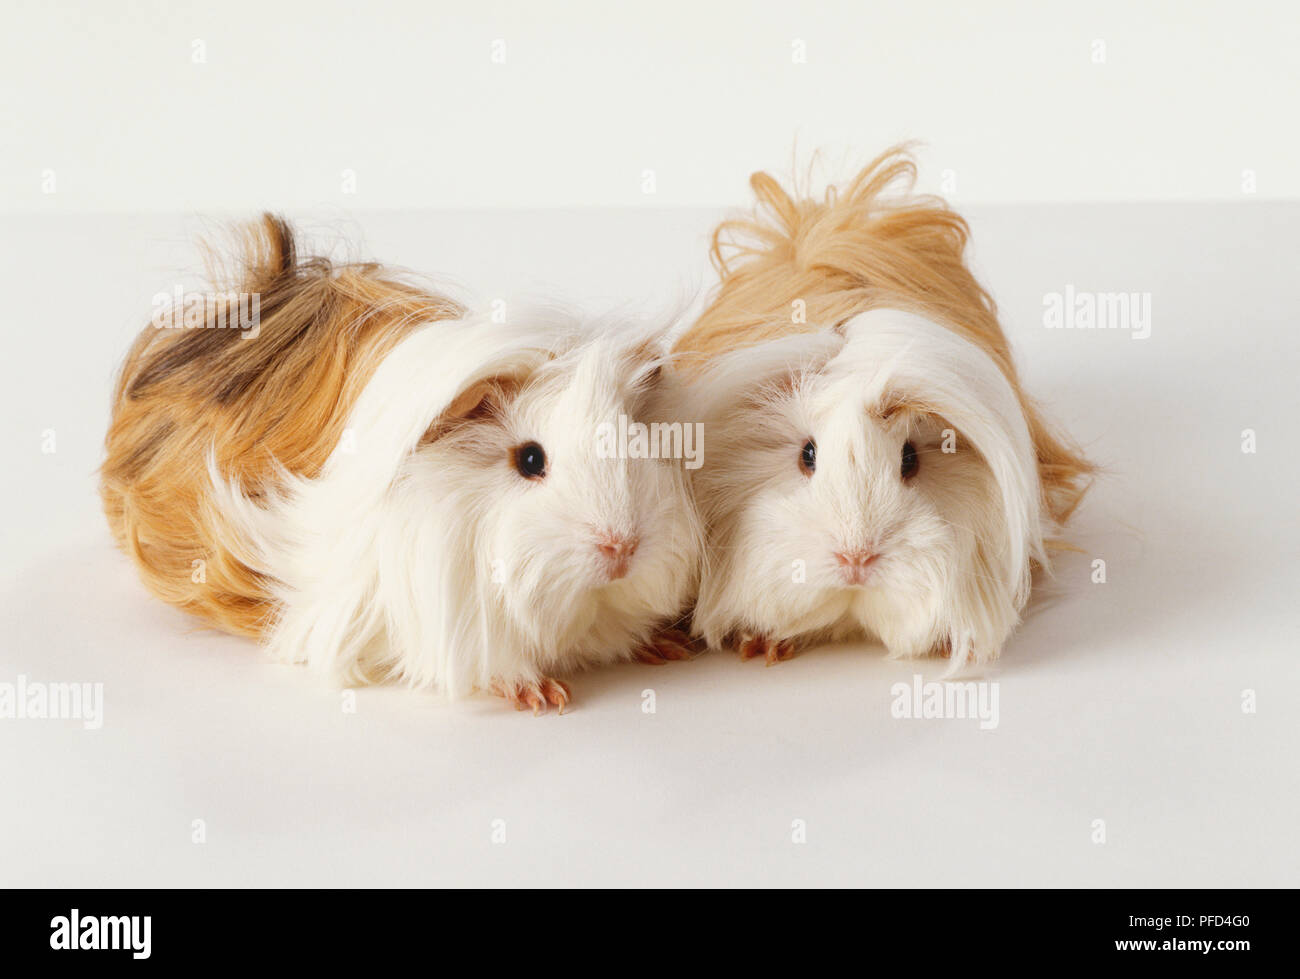 Guinea Pigs Long Haired Two tan and white, long-haired Peruvian Guinea Pigs (Cavia porcellus)  standing together, looking ahead Stock Photo - Alamy